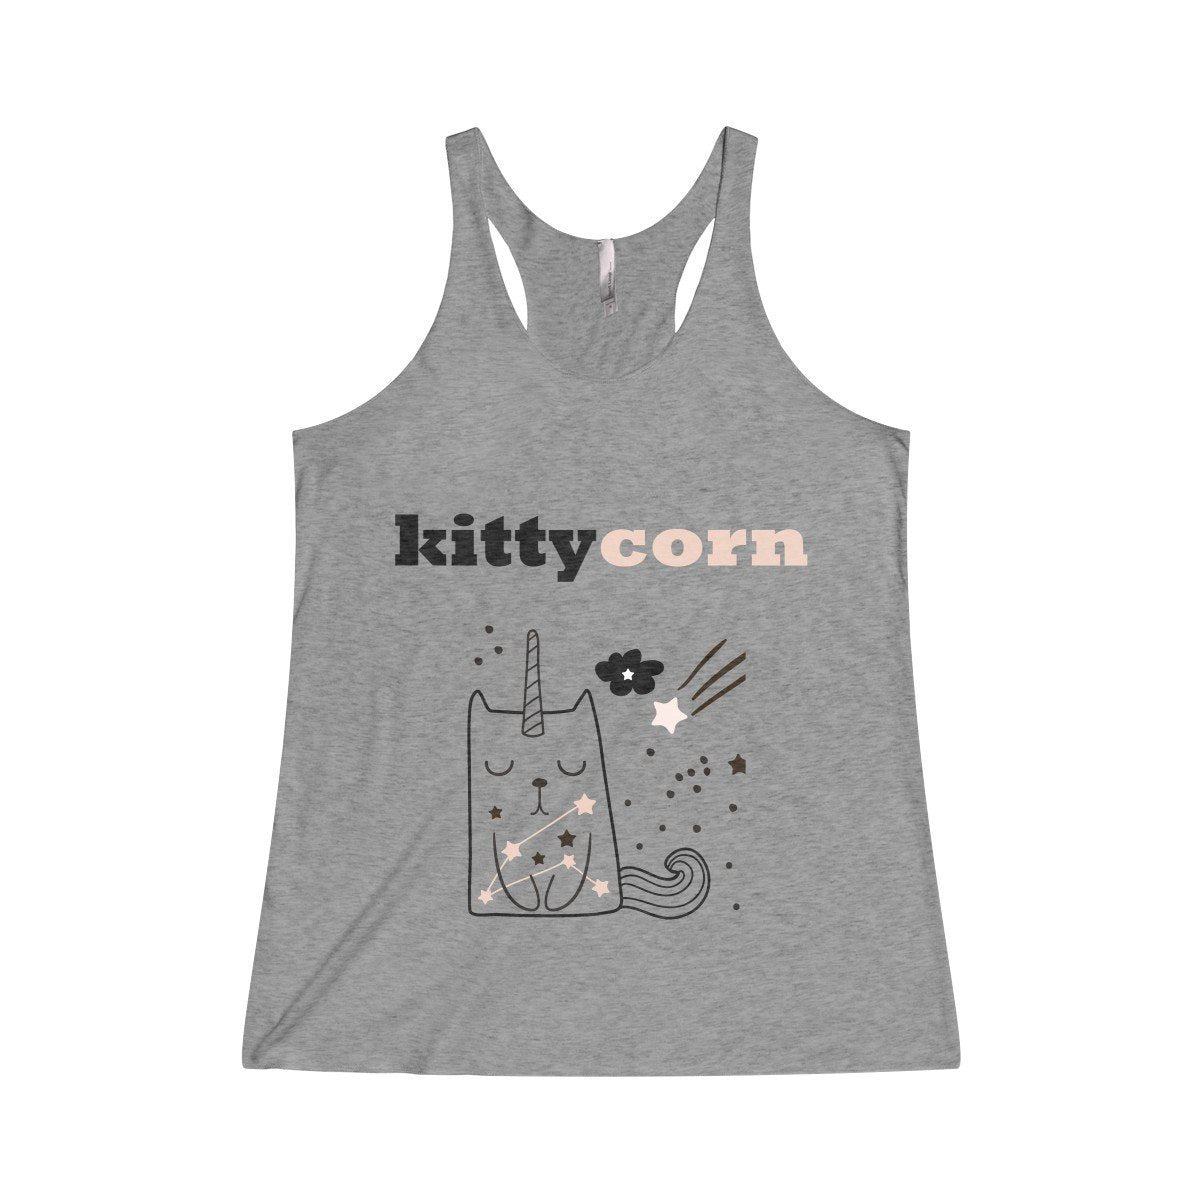 This cute kitty top features a "kittycorn" inscription and a unicorn cat printed on the front.